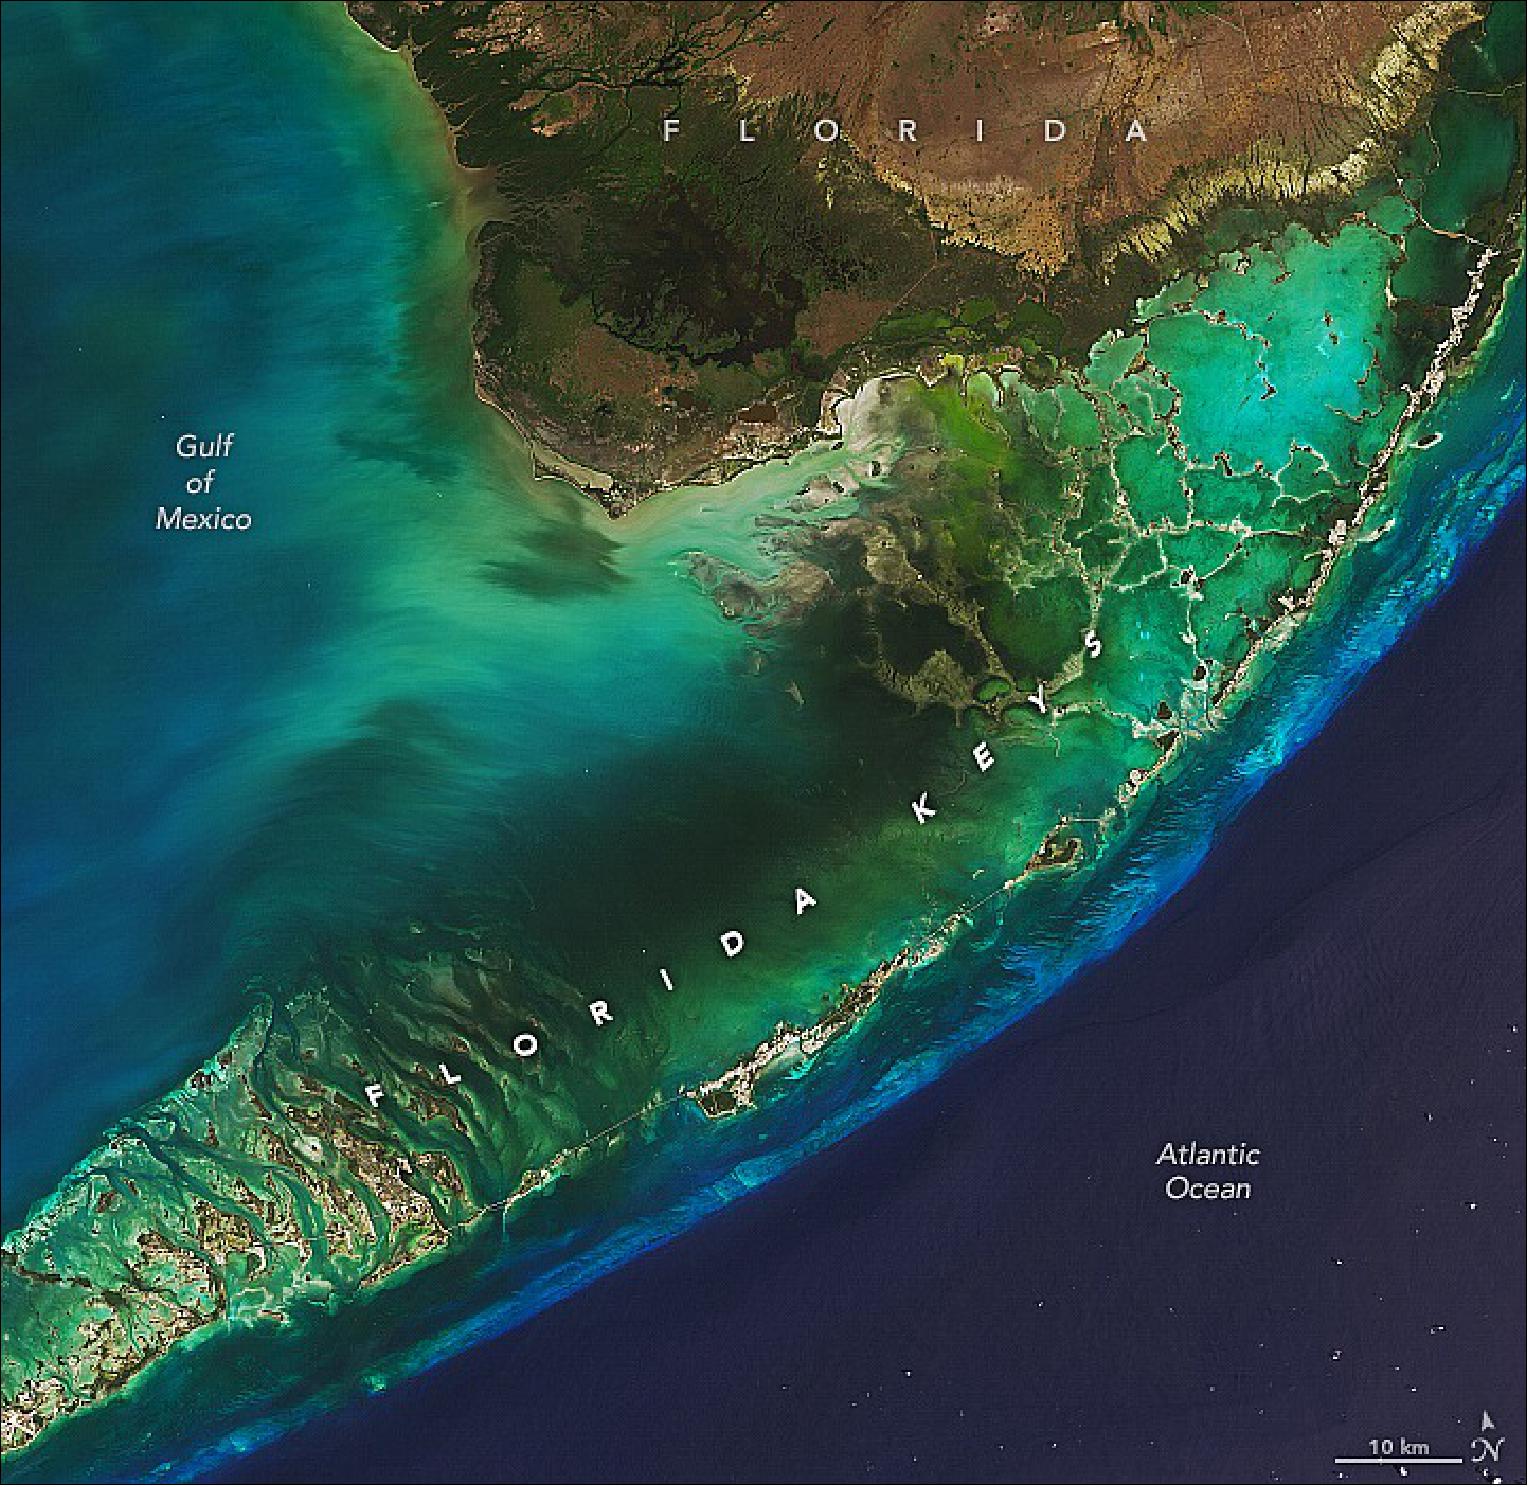 Figure 40: On March 30, 2022, the OLI instrument on Landsat-8 captured these natural-color views of the islands. North and west of the island chain, light passing through shallow waters and reflecting off the sea grass beds and sandy bottoms of Florida Bay gives this part of the scene a green-yellow hue. The light blue line south and east of the islands is a living coral reef system—among the largest in the world. Deeper water beyond the edge of the Florida platform appears dark blue (image credit: NASA Earth Observatory images by Lauren Dauphin, using Landsat data from the U.S. Geological Survey. Caption by Adam Voiland)